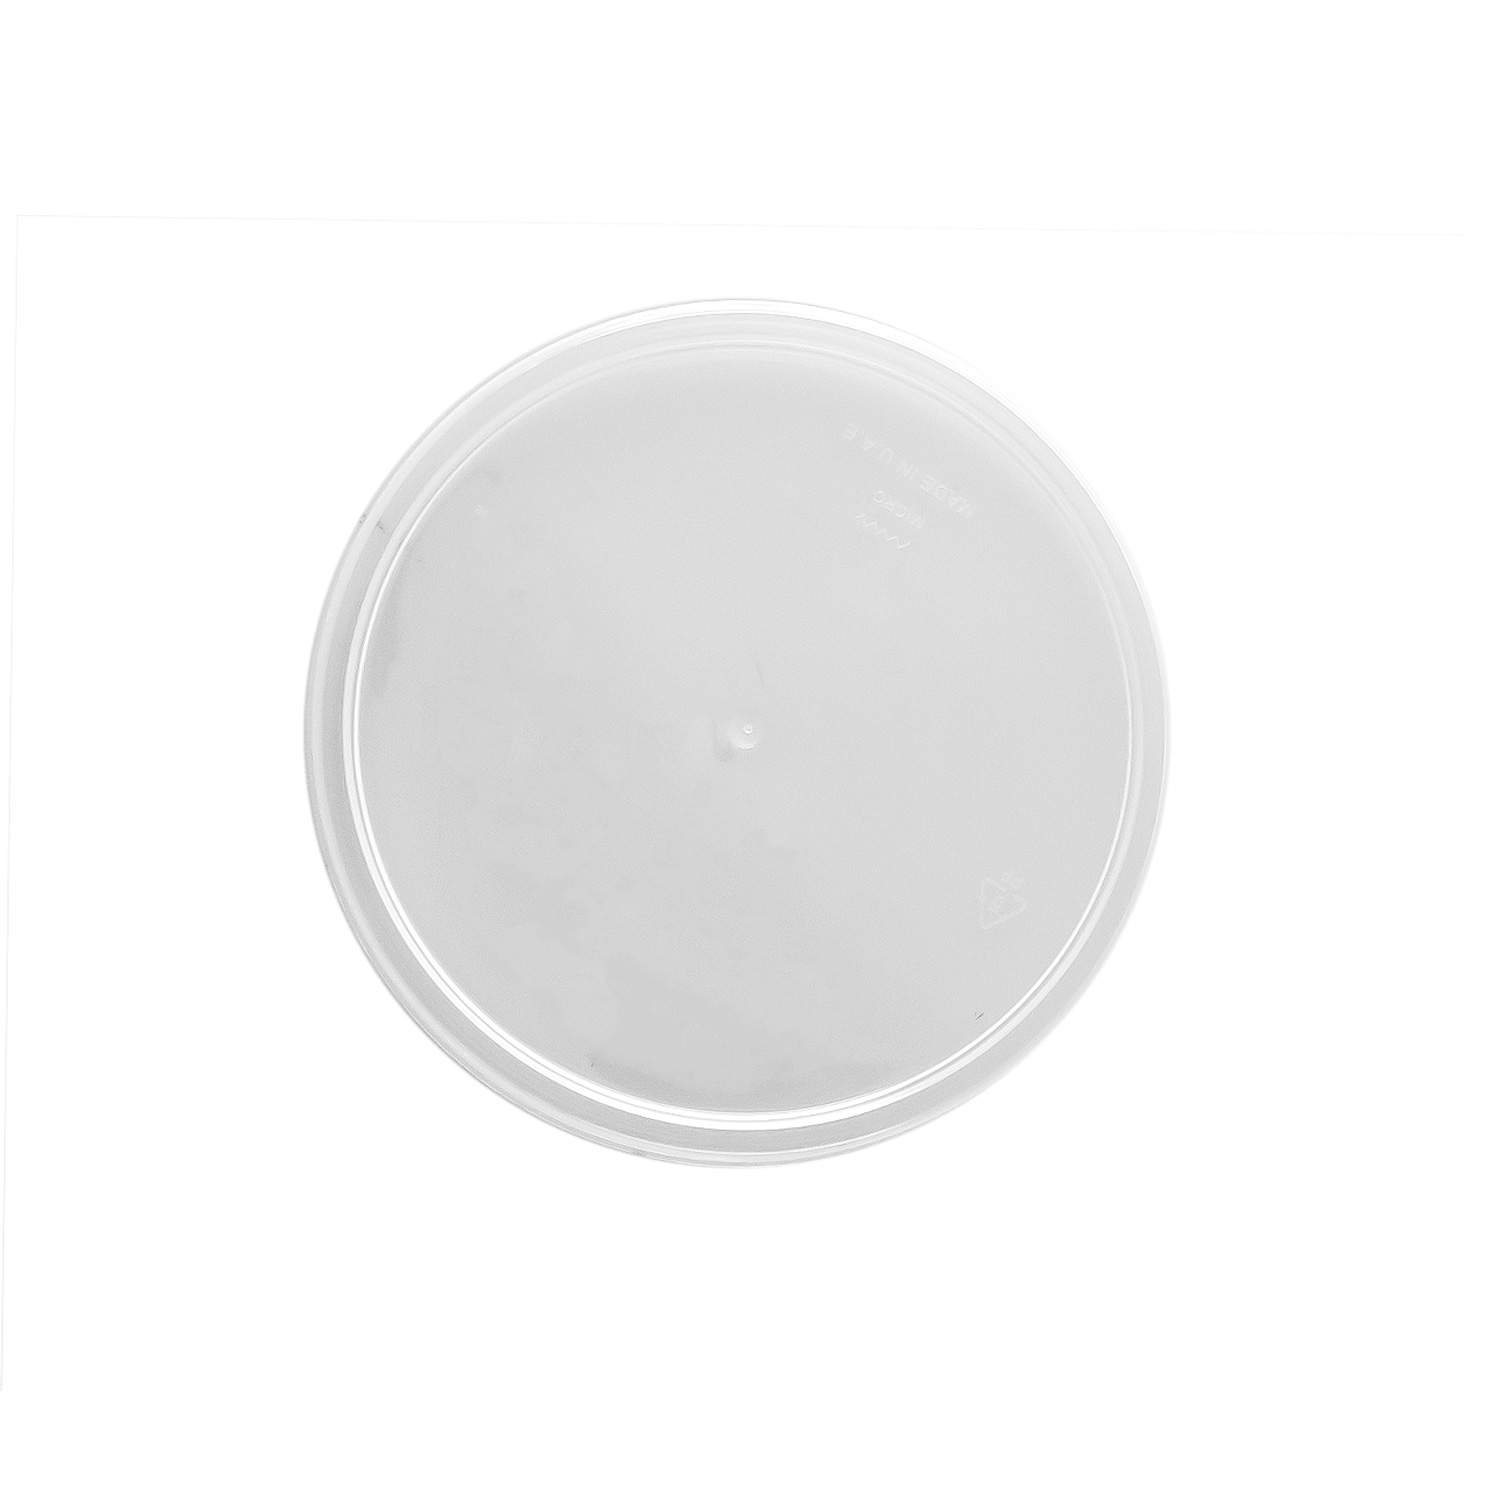 Lids for Microwave Containers (Fits 225 cc, 250 cc, 450 cc, 525 cc containers) 